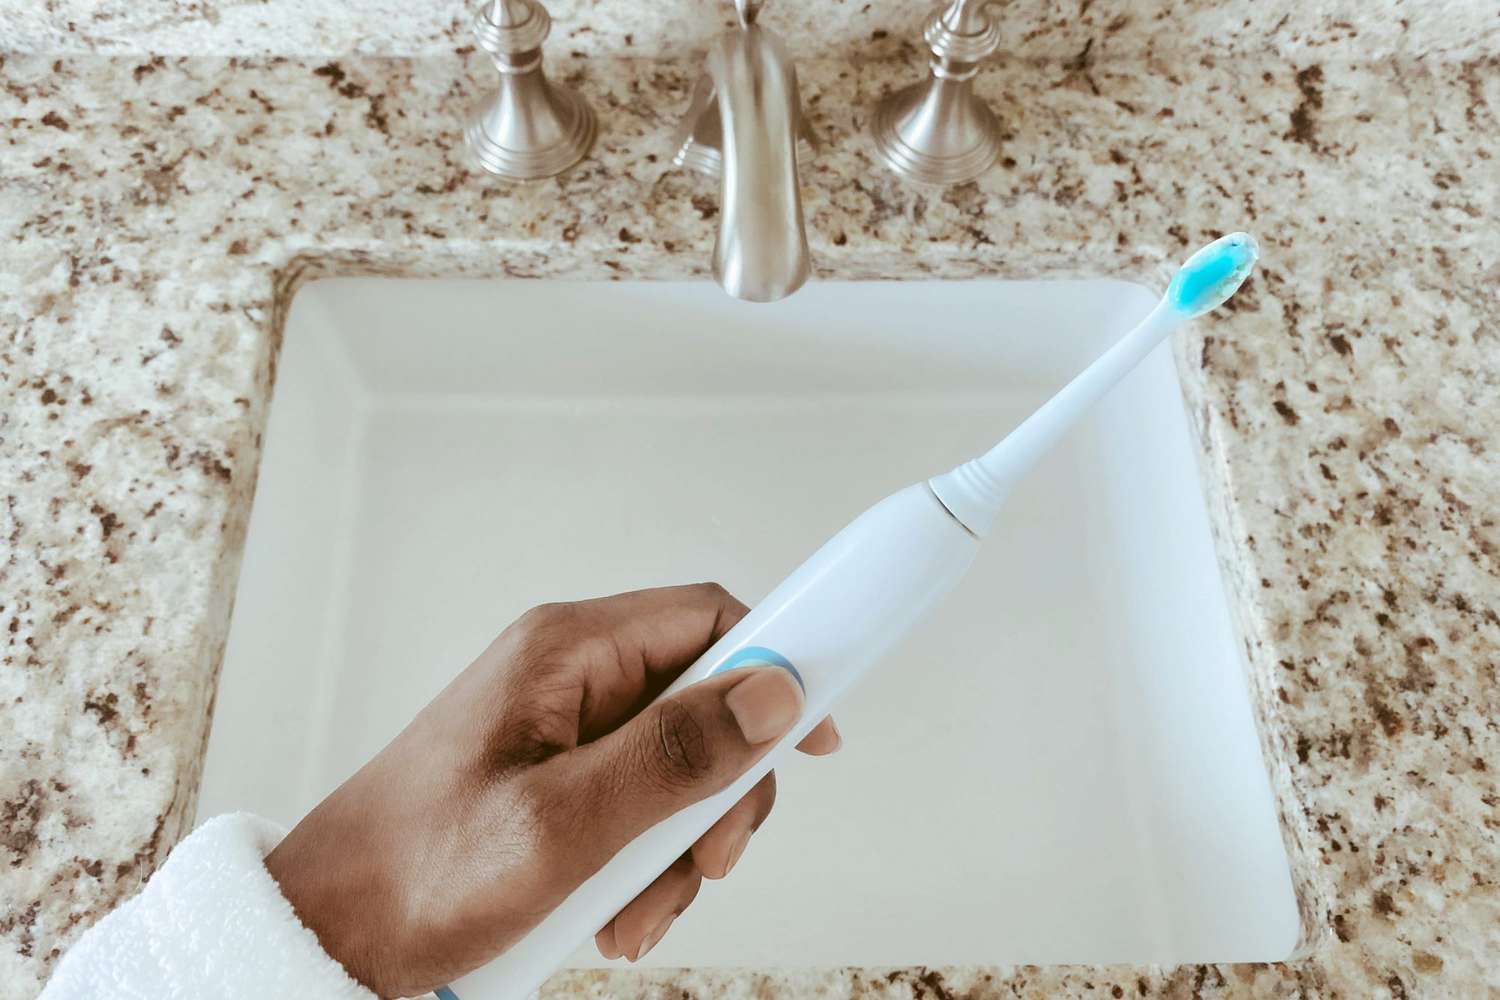 holding electric toothbrush over sink